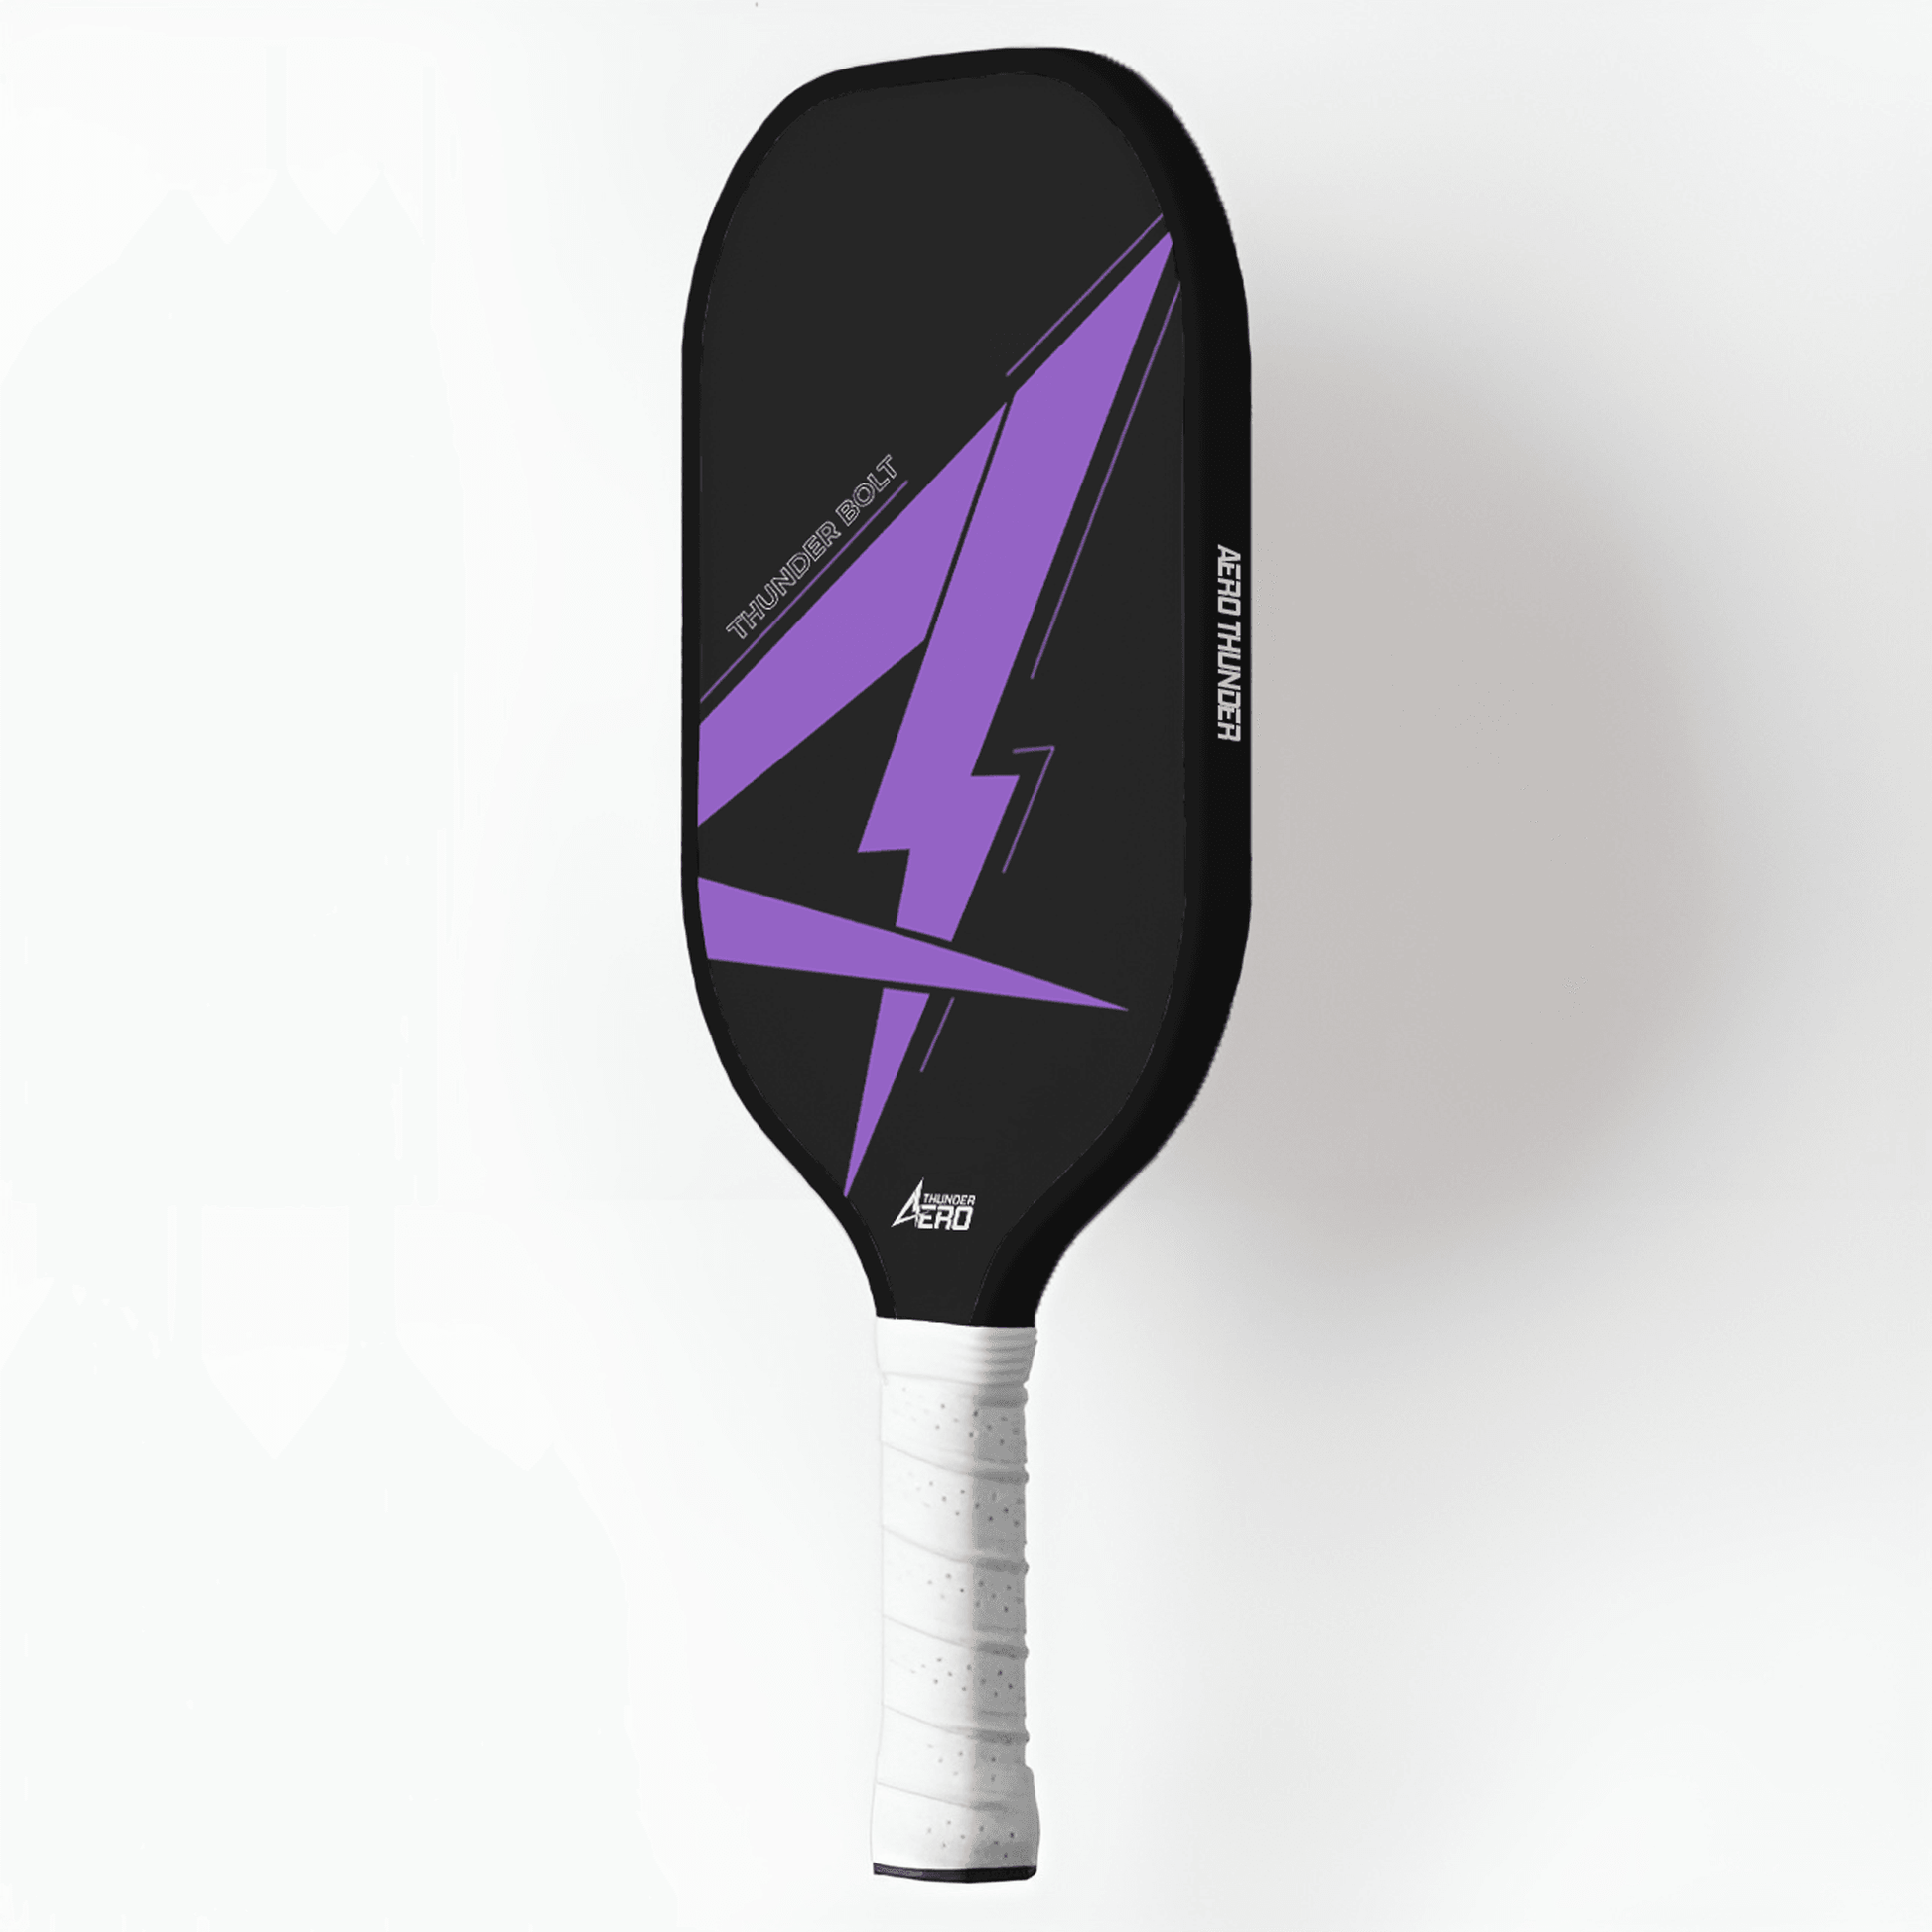 Aero Thunder Pickleball Paddle - Cutting-Edge Design for Spin Accuracy